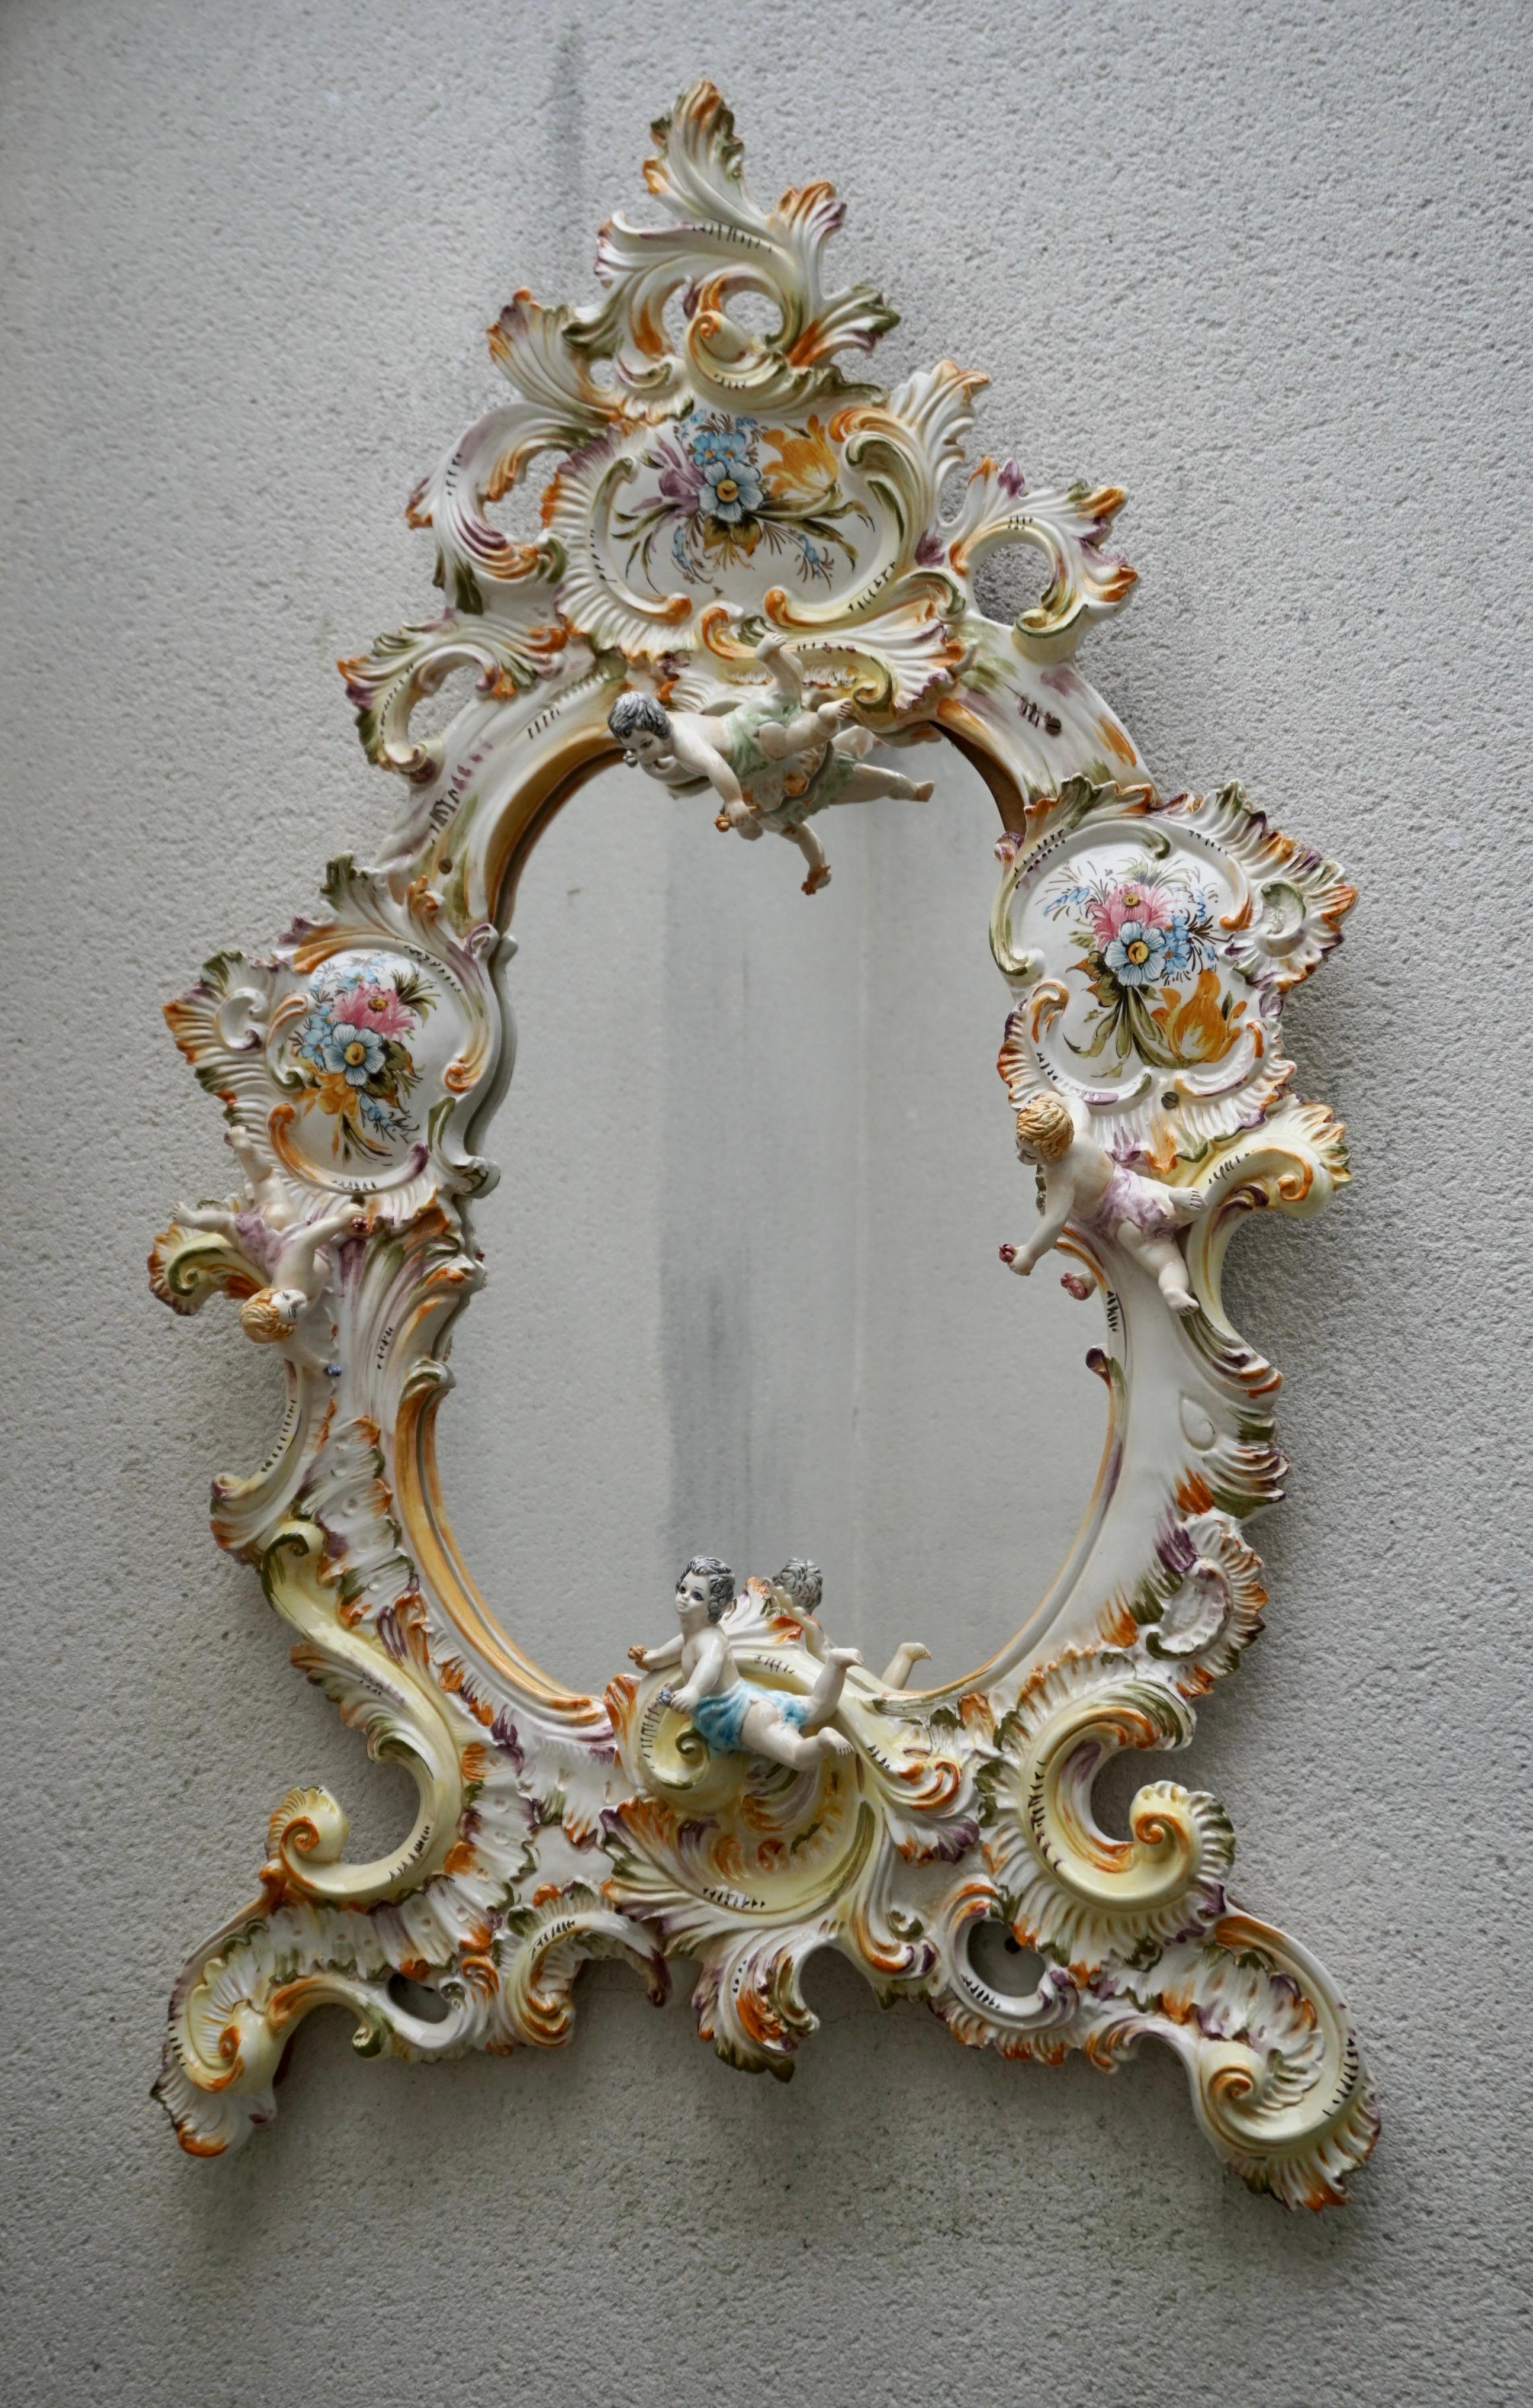 Painted Mid-20th Century Italian Capodimonte Porcelain Mirror with Flowers and Cherubs For Sale